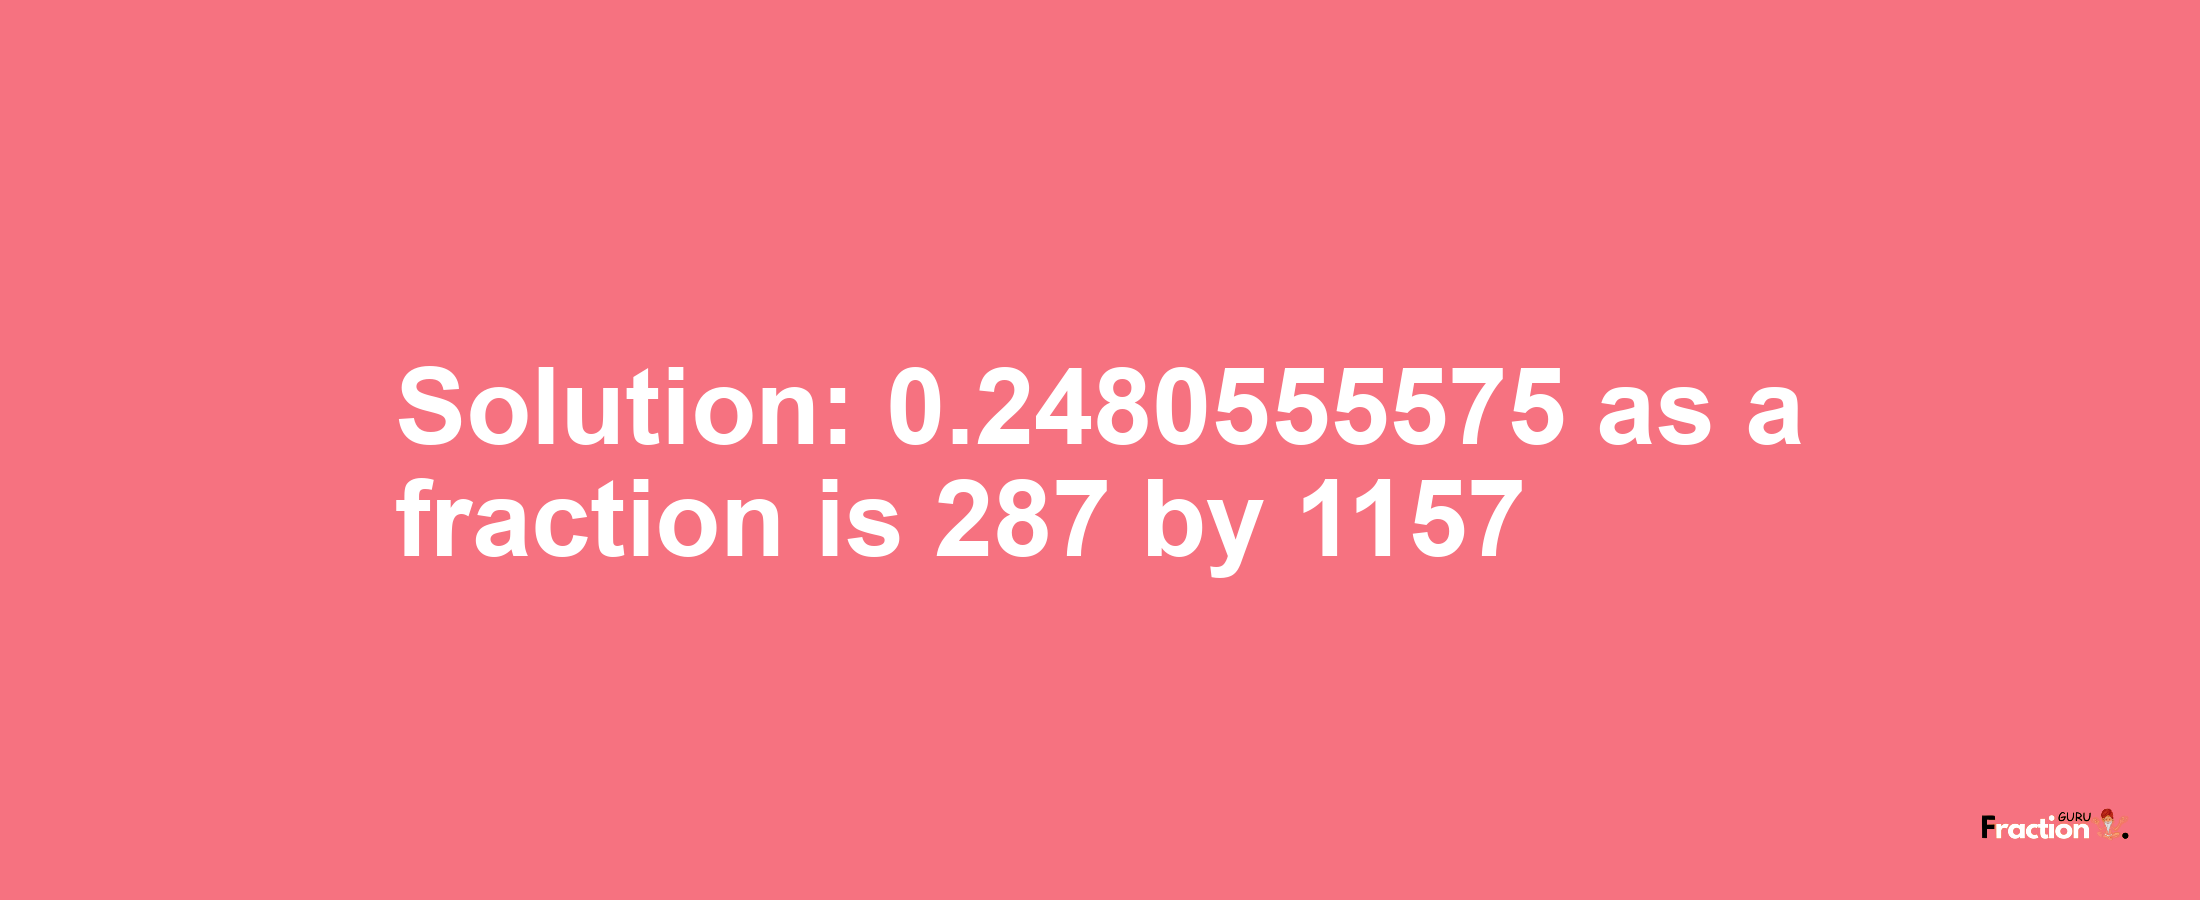 Solution:0.2480555575 as a fraction is 287/1157